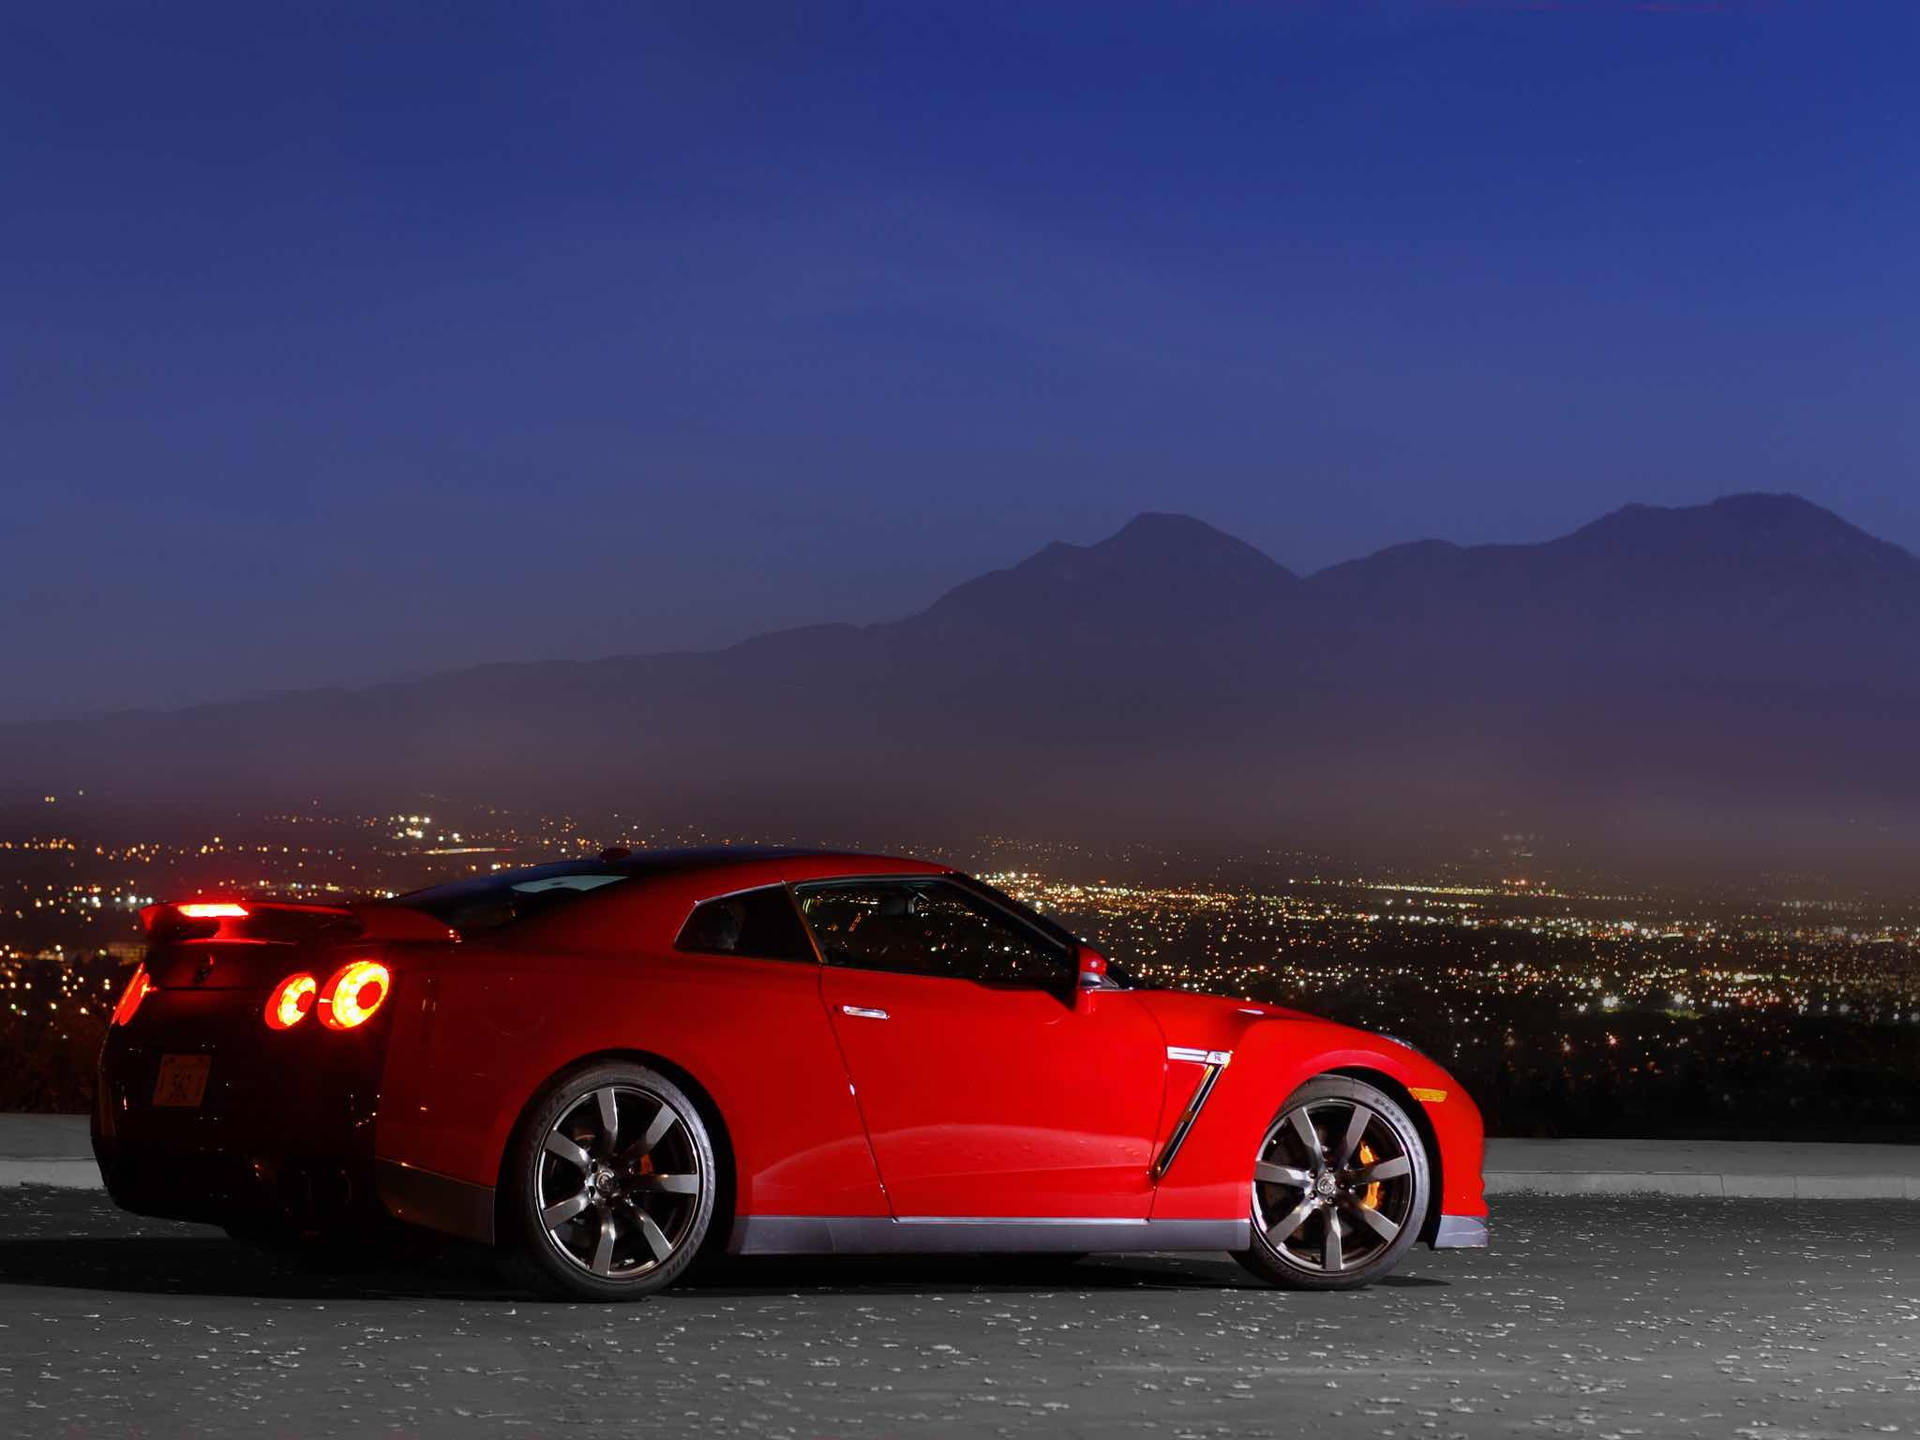 Nissan Skyline GTR R35 City And Mountain View Wallpaper